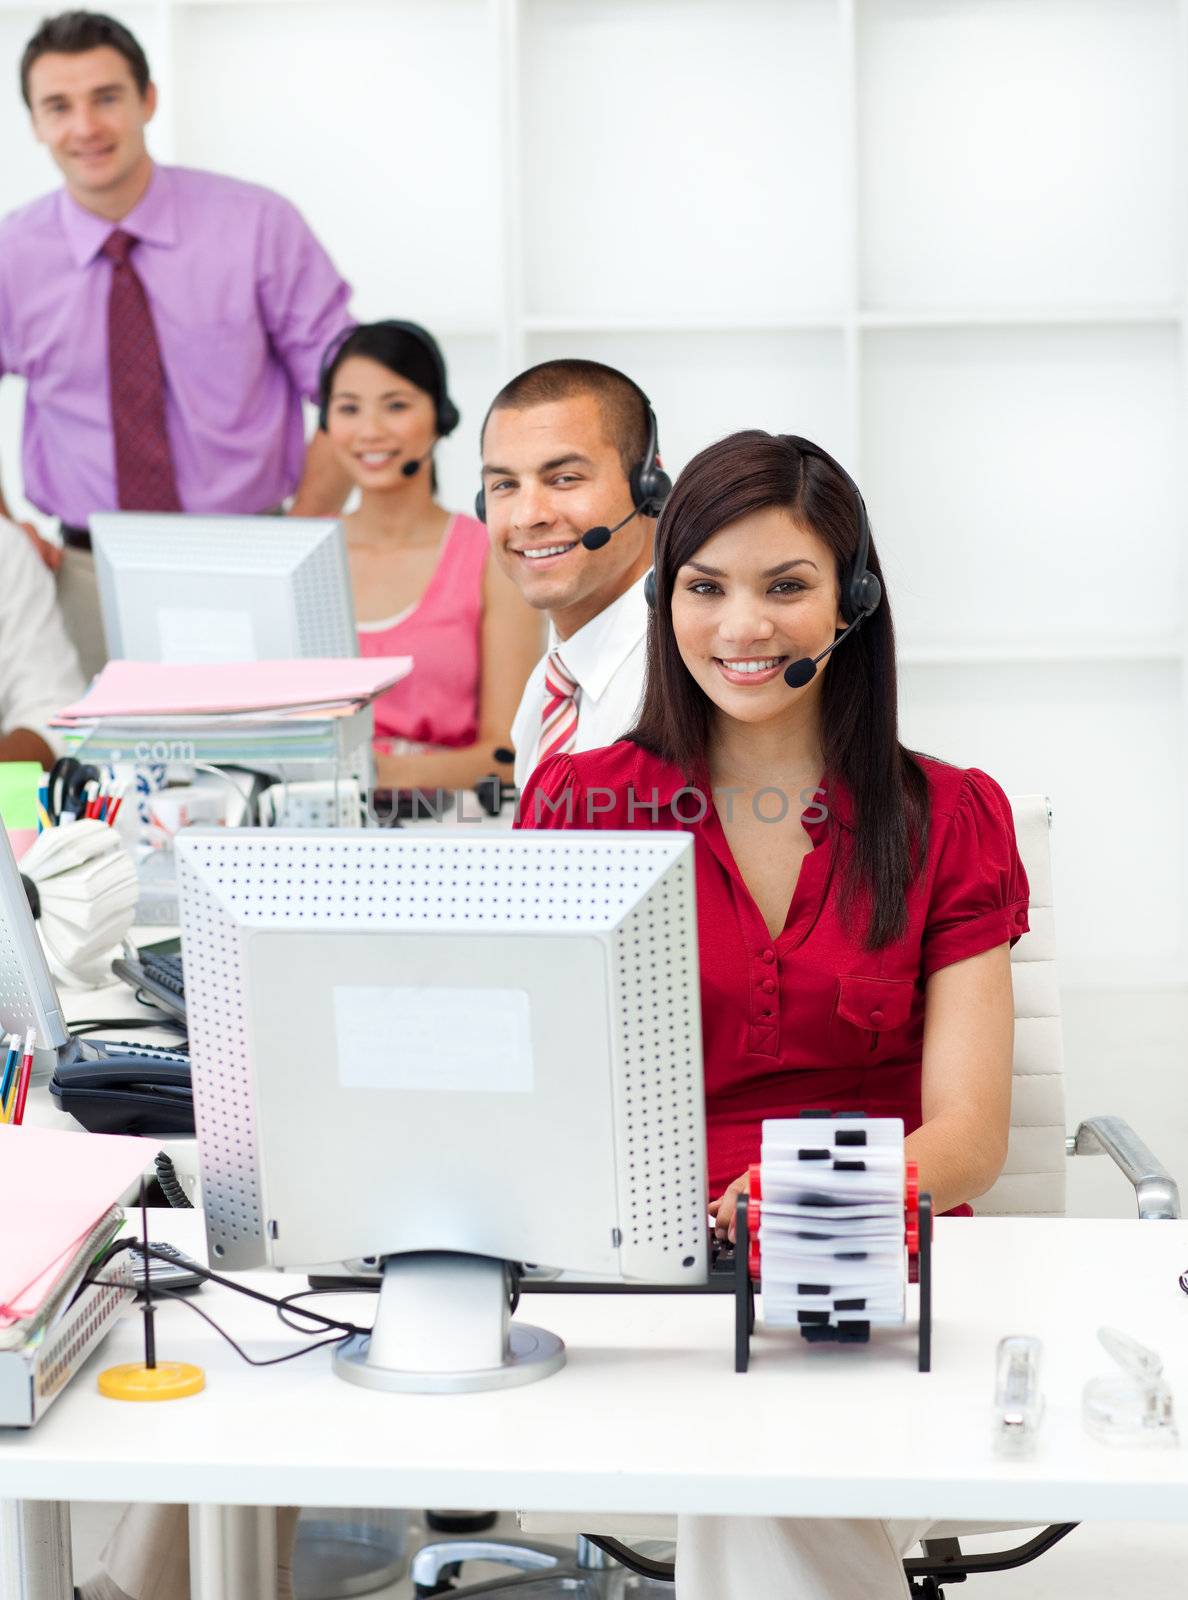 Smiling business people with headset on working  by Wavebreakmedia